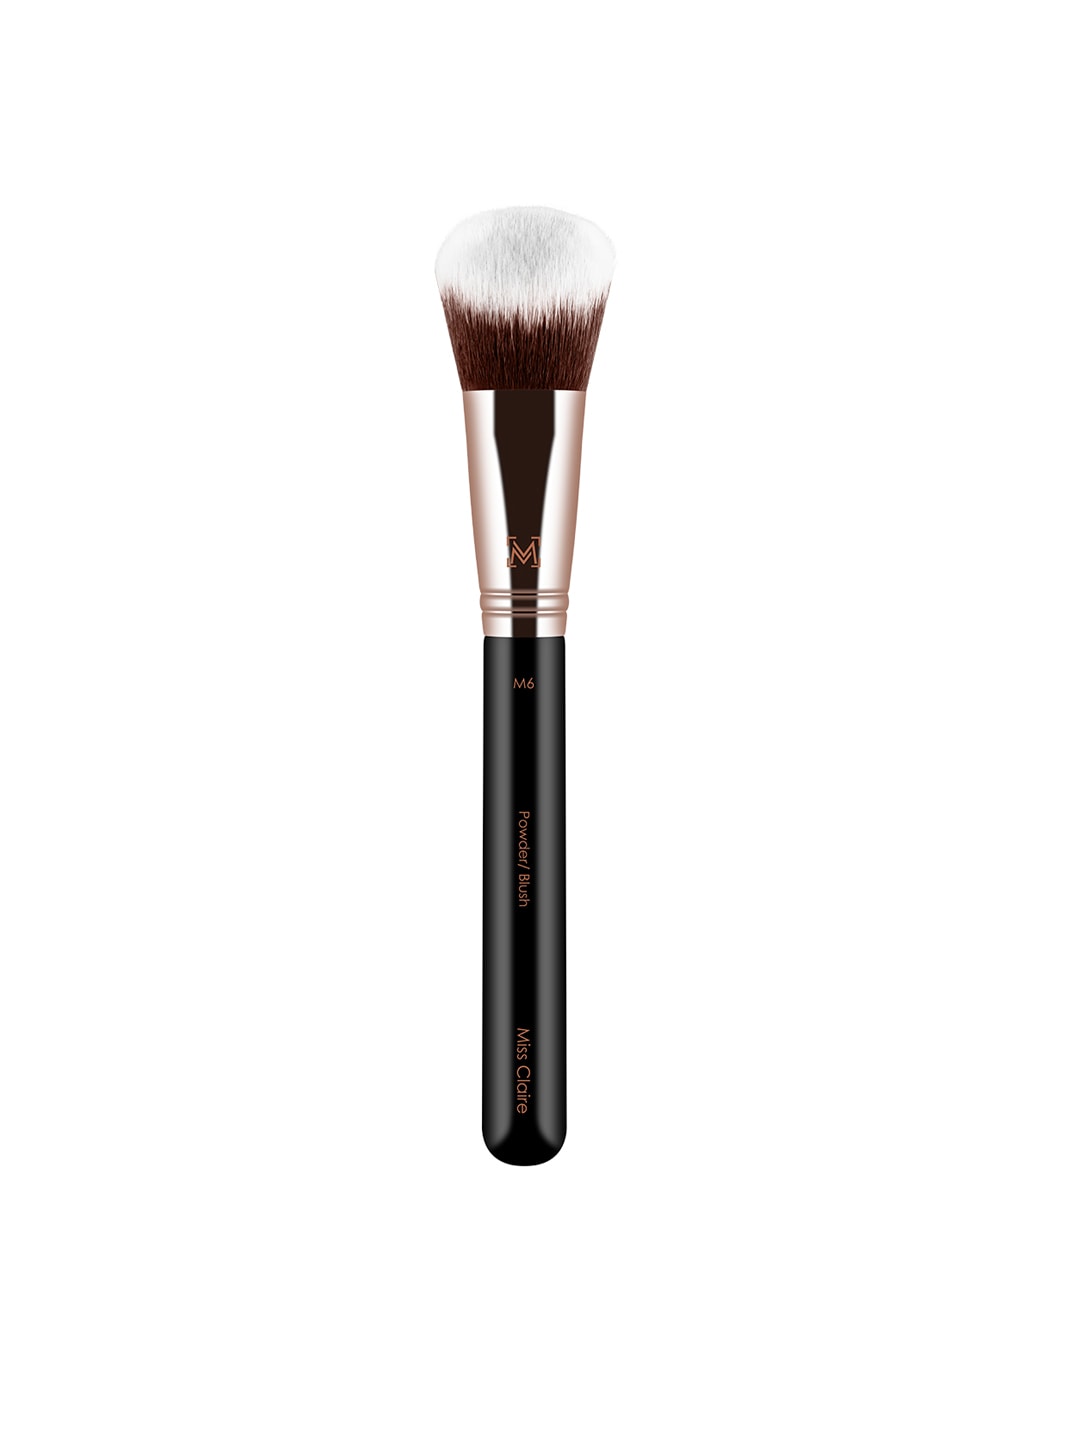 Miss Claire Powder / Blush Brush - M6 Black & Rose Gold-Toned Price in India